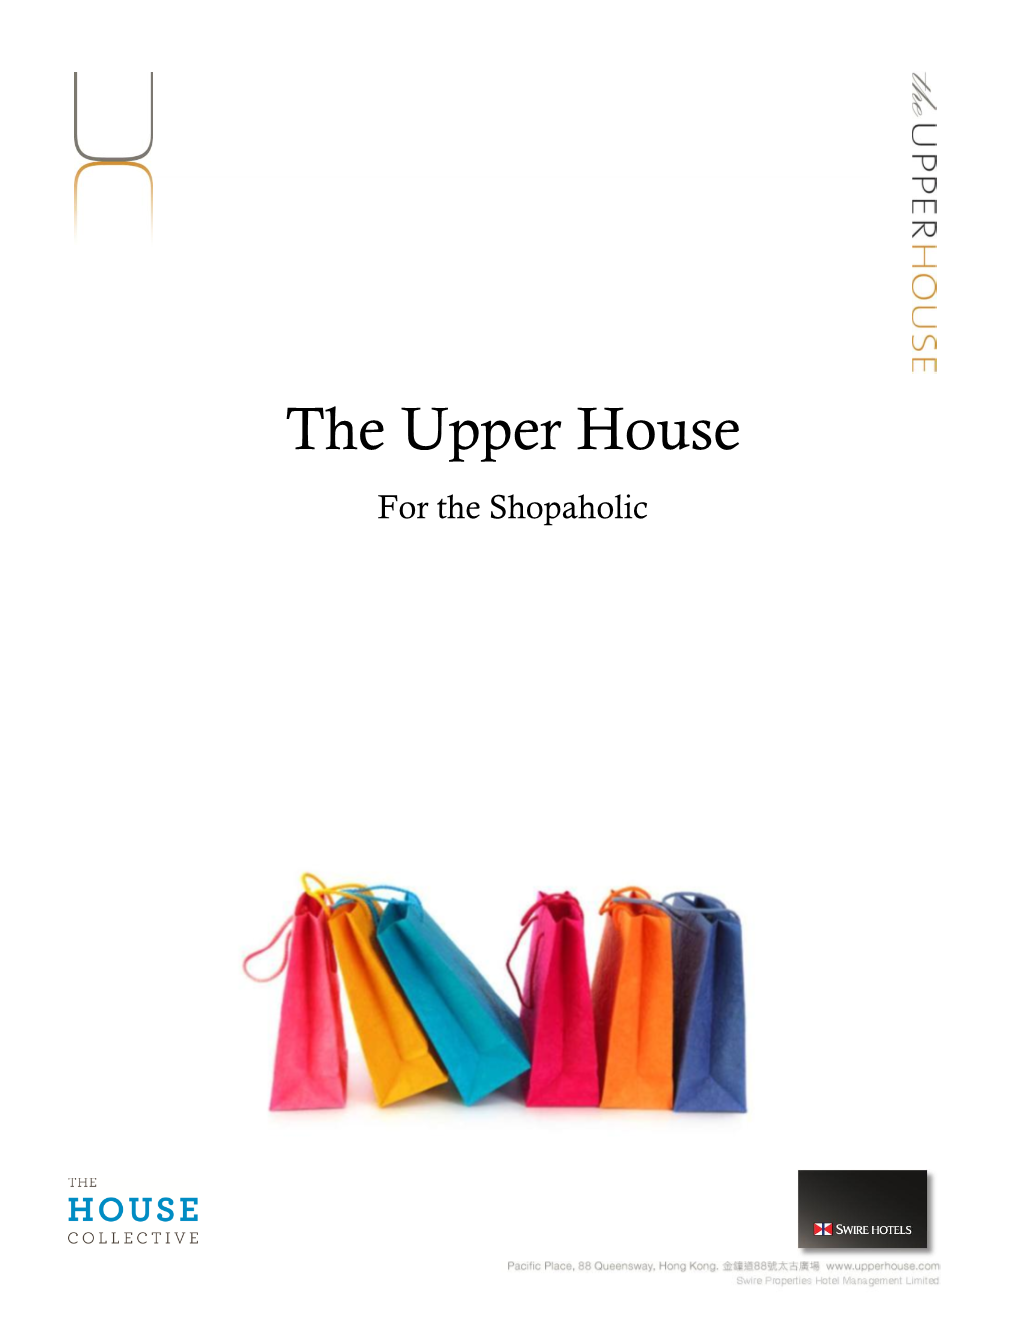 The Upper House for the Shopaholic